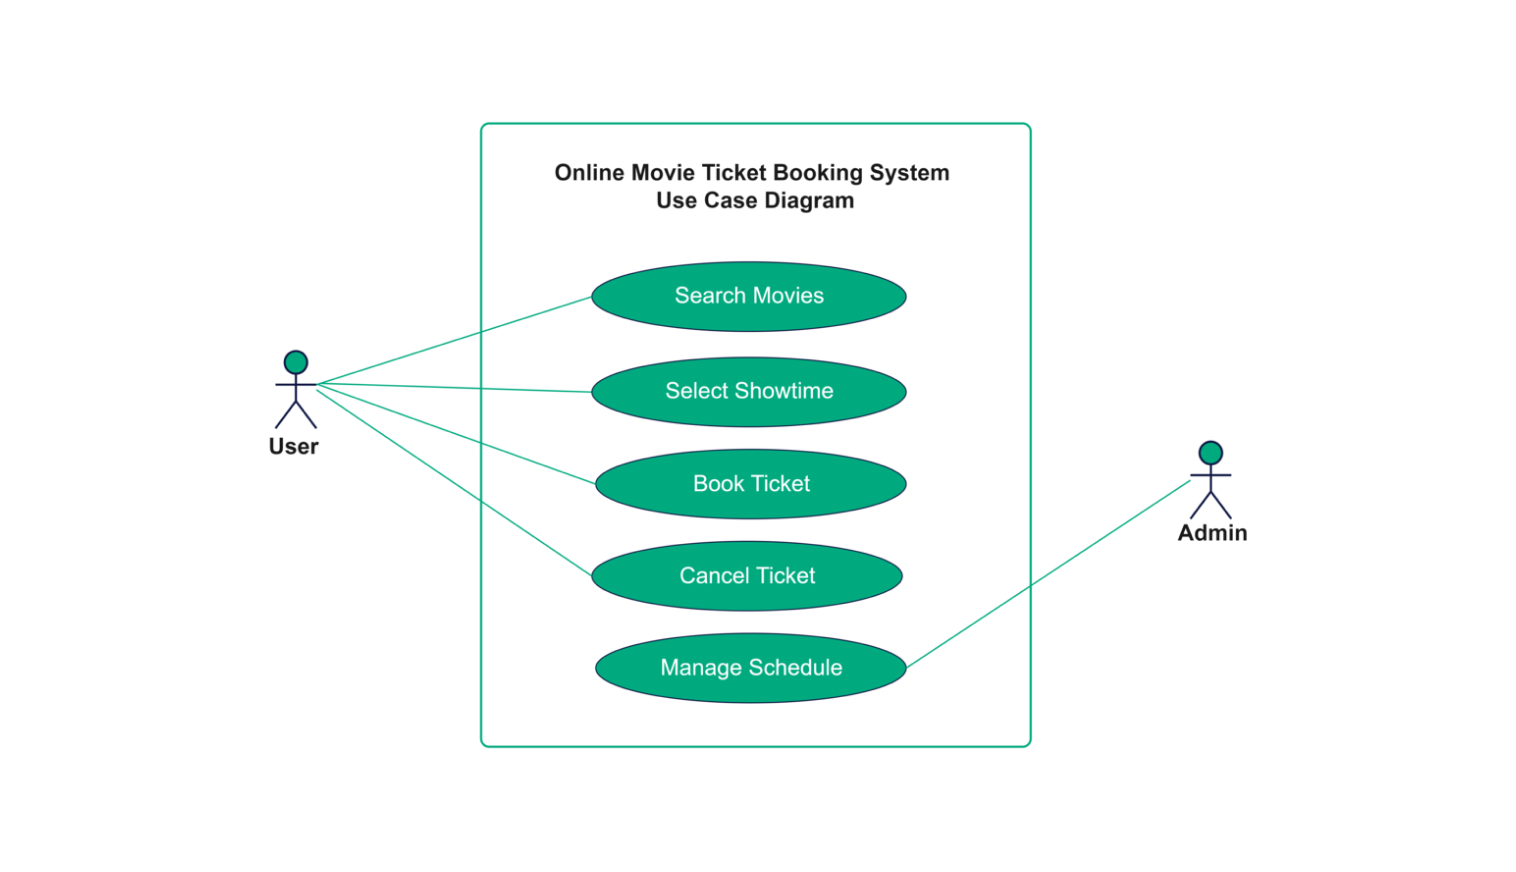 Usecase Diagram for online movie ticket booking system